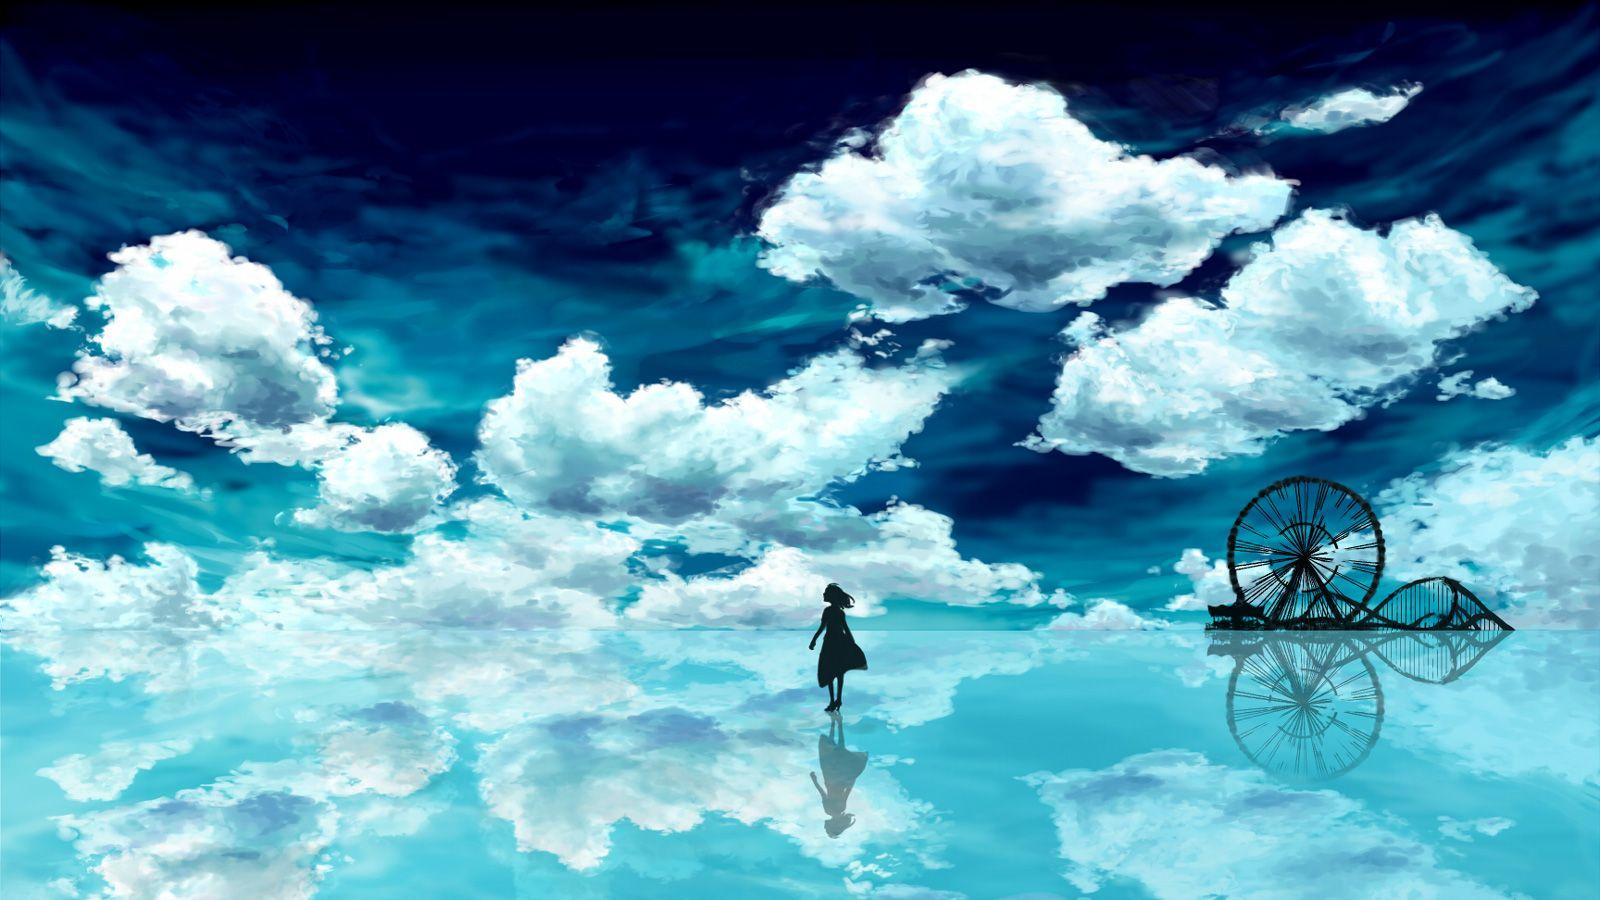 Anime Scenery Wallpapers Tumblr Hd Widescreen 11 HD Wallpapers